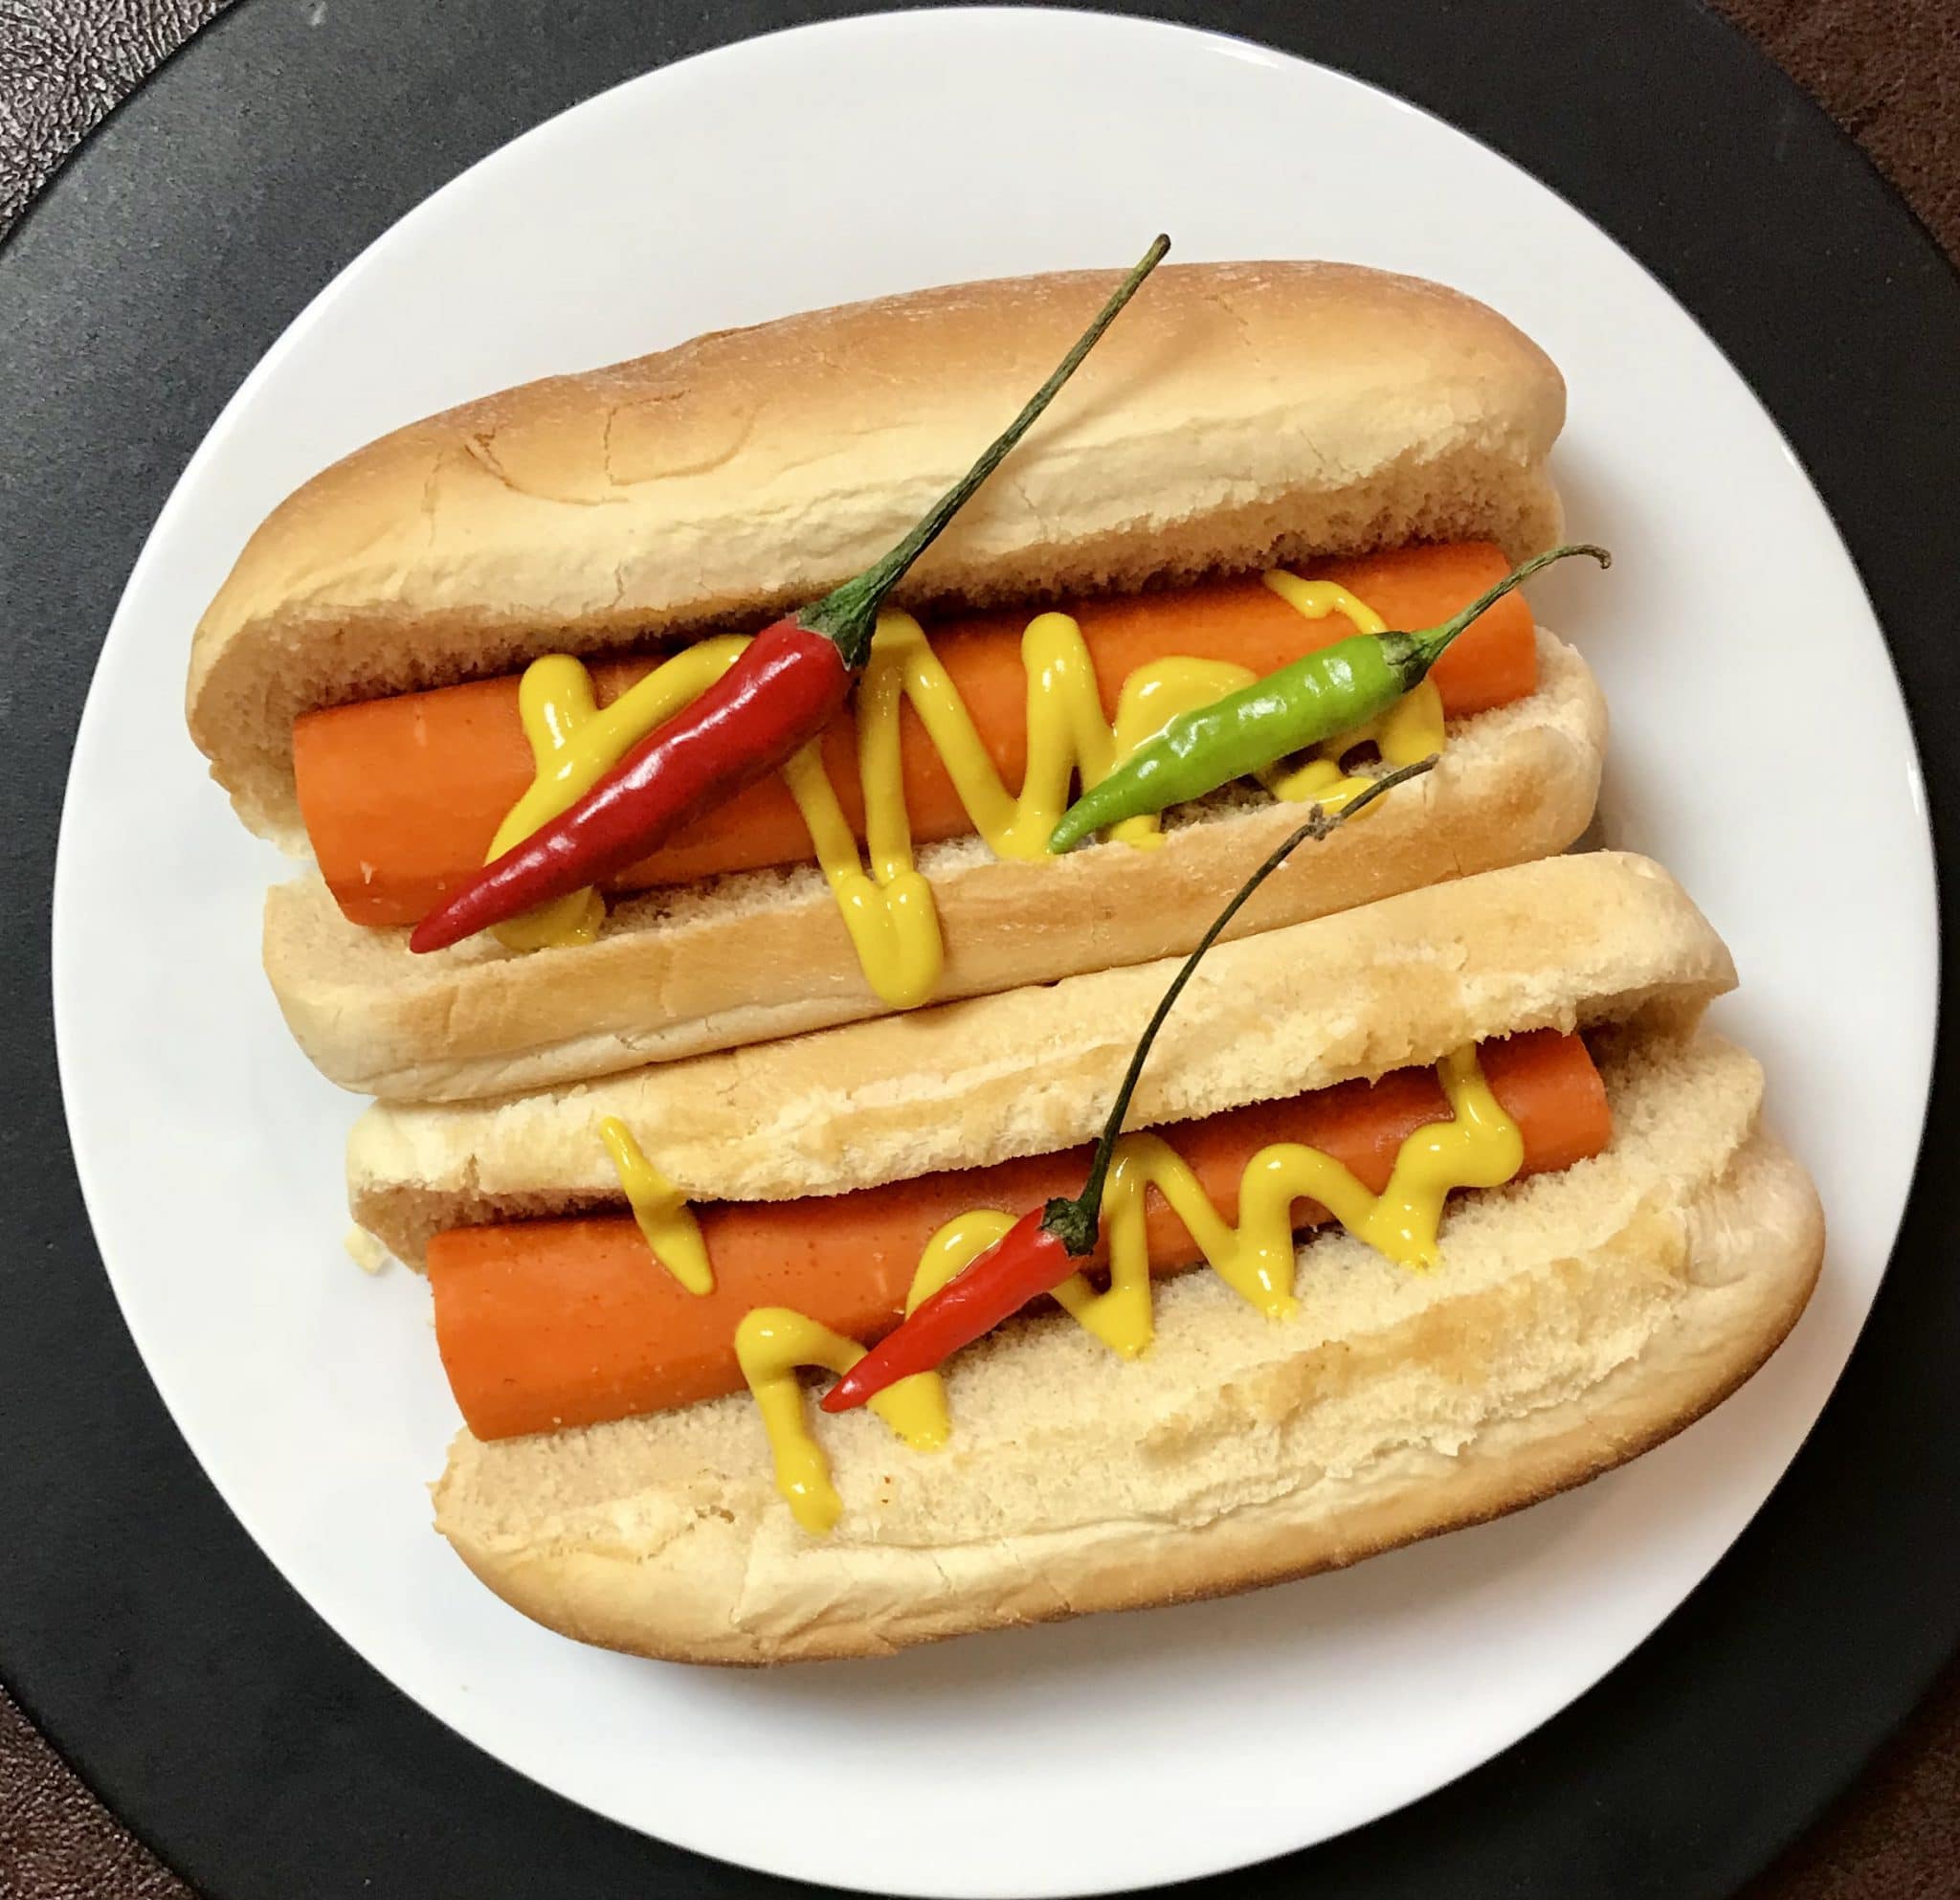 Carrot "Hot Dogs" from 40YearOld Vegan Jane Unchained News